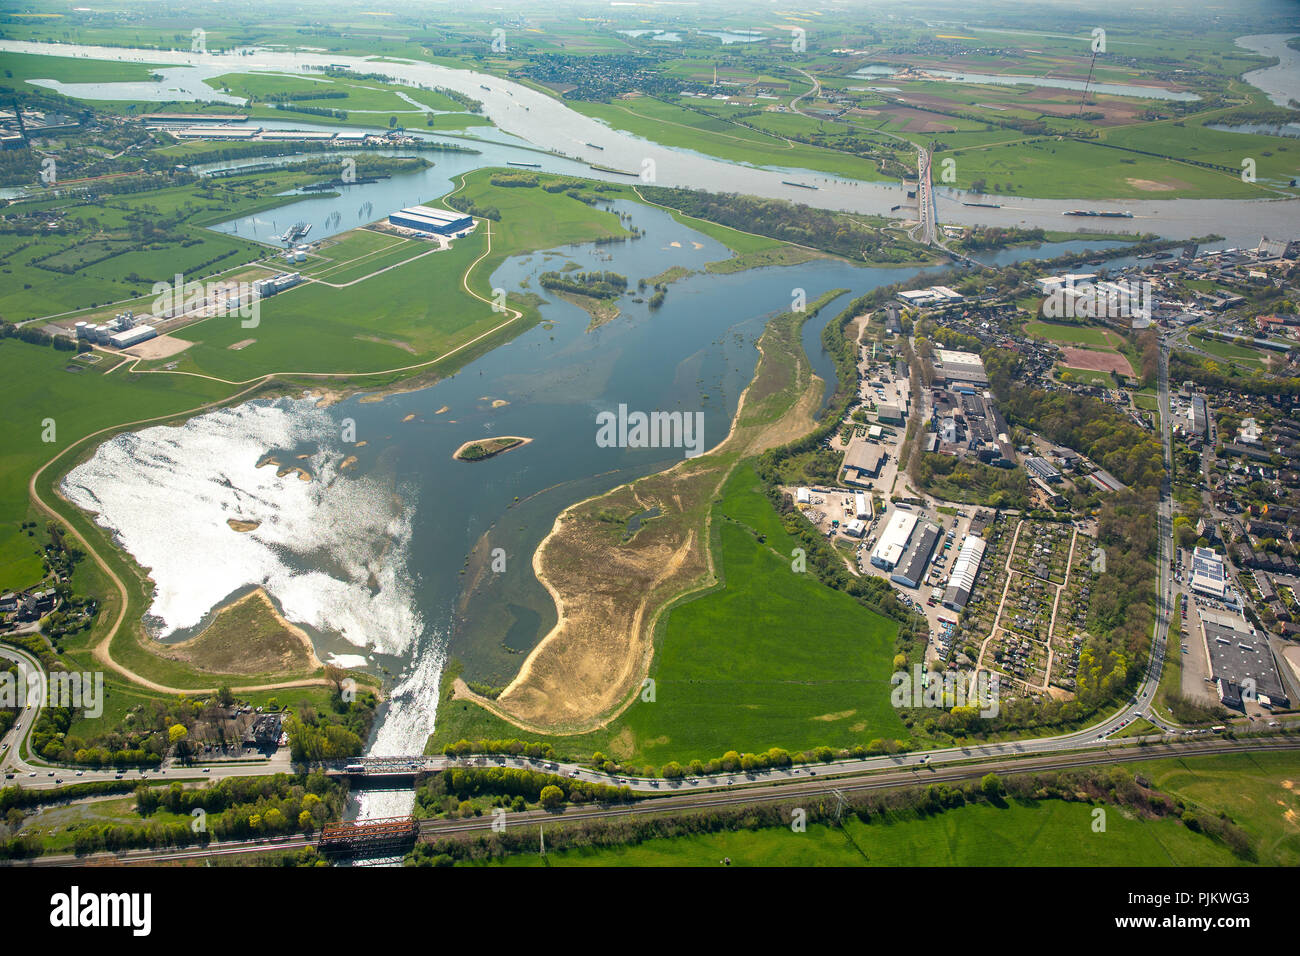 Lippe estuary in Rhine, reconstruction, nature conservation, flooding areas, Lippeverband, Wesel, Ruhr area, North Rhine-Westphalia, Germany Stock Photo